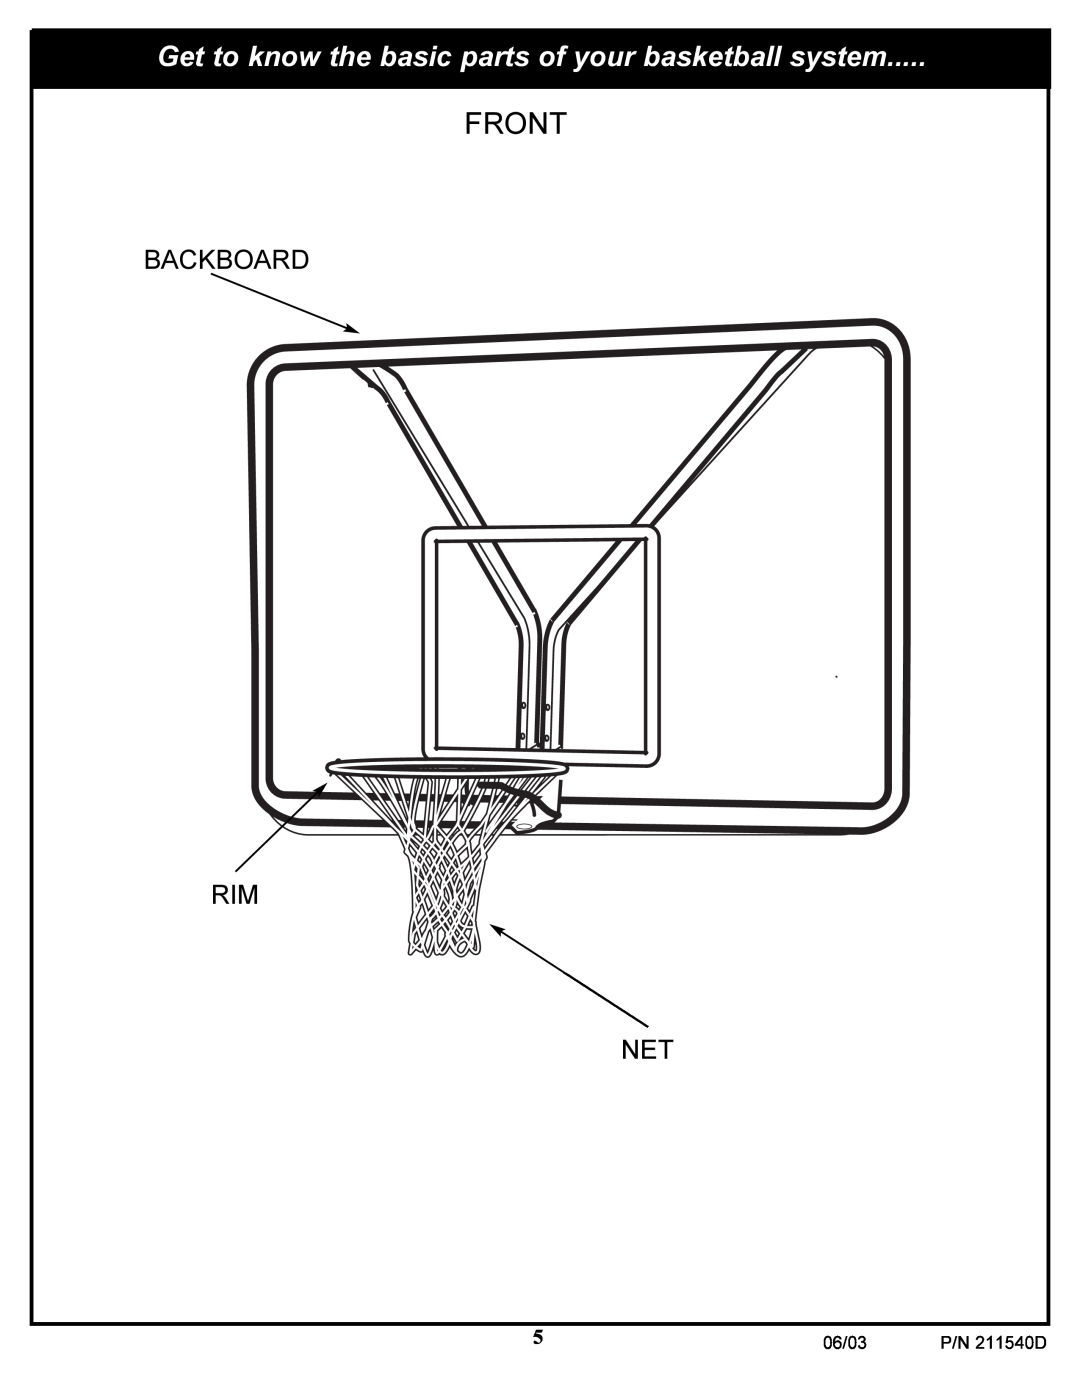 Huffy Backboard and Rim manual Get to know the basic parts of your basketball system, Backboard Rim Net, Front 